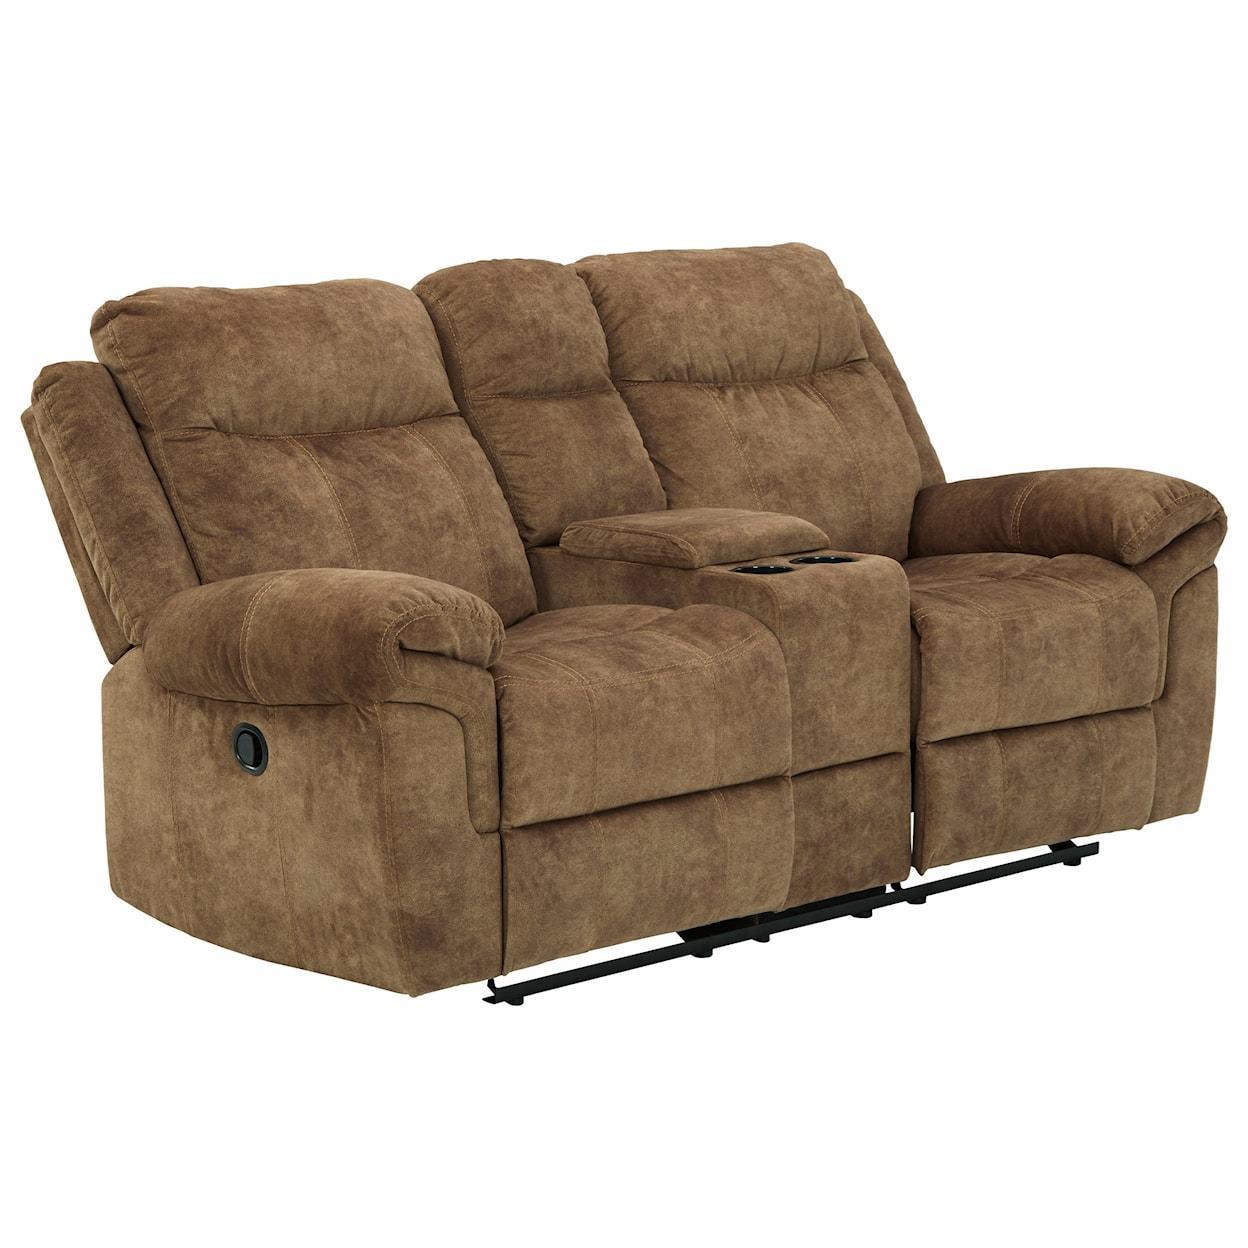 Benchcraft Huddle-Up Double Reclining Loveseat w/ Console